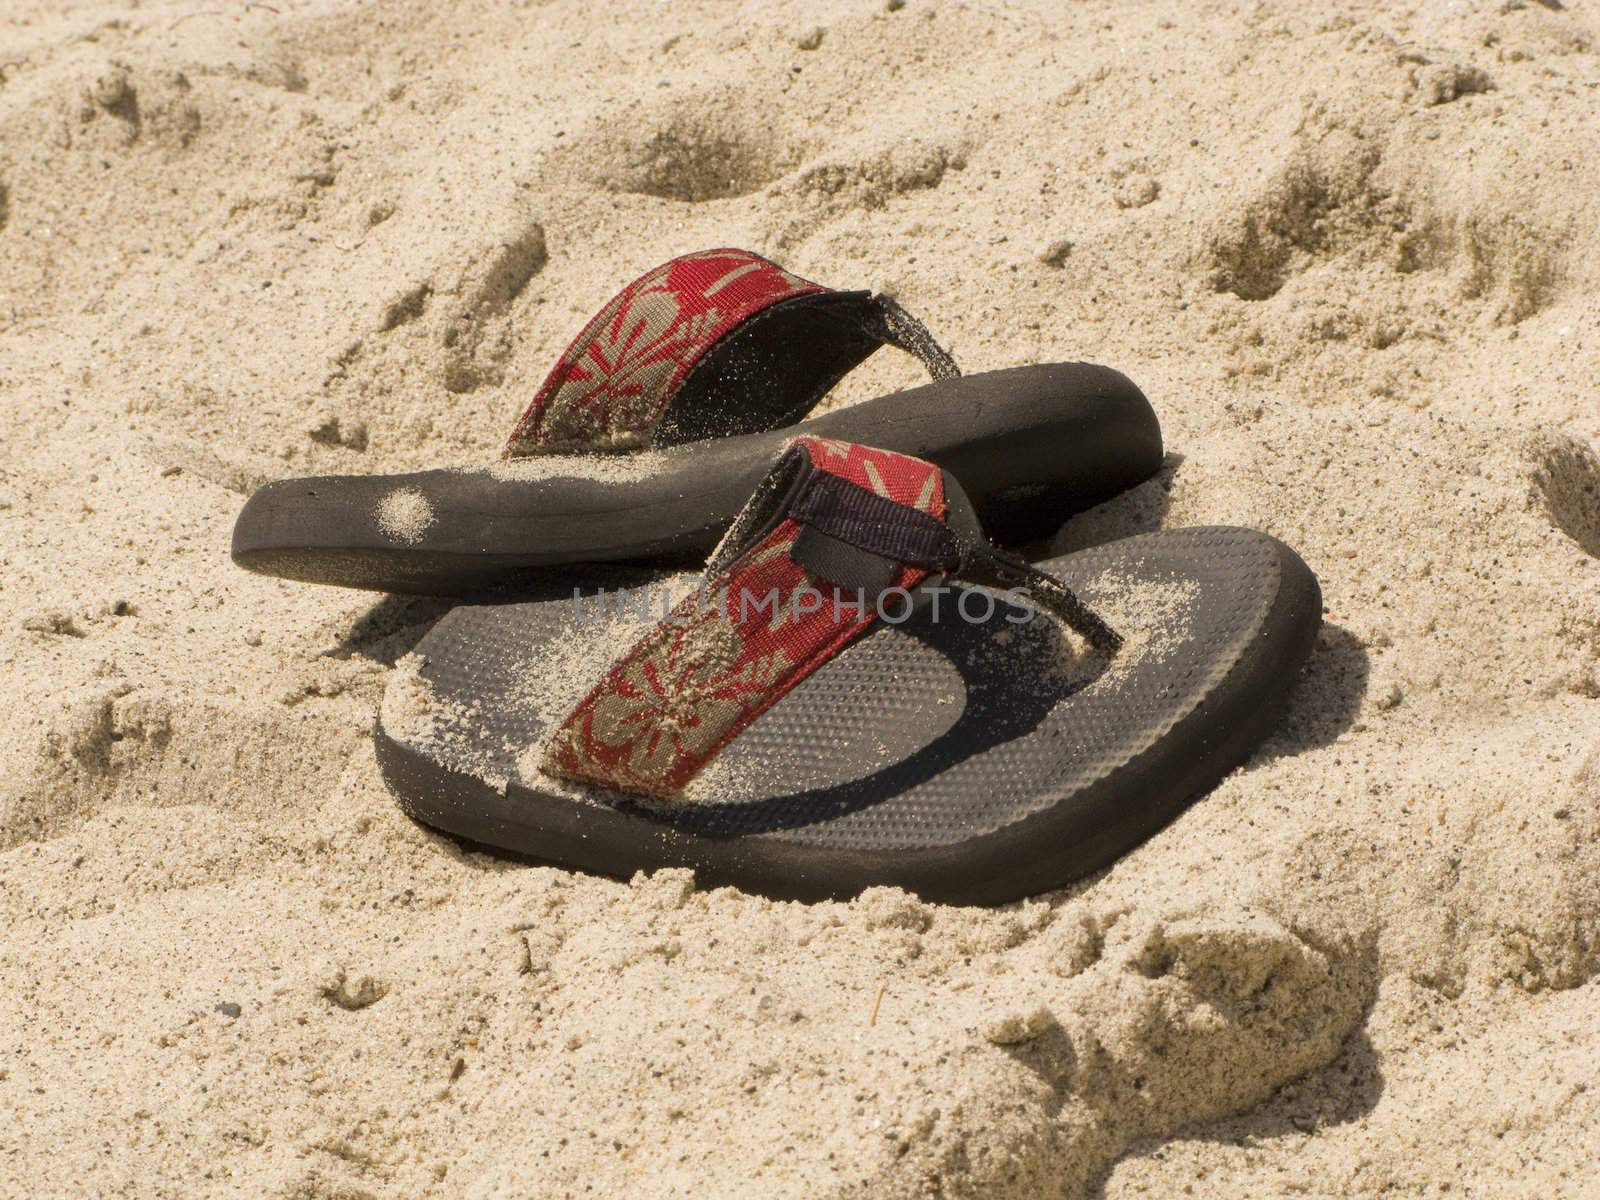 Sandals in the Sand by KevinPanizza